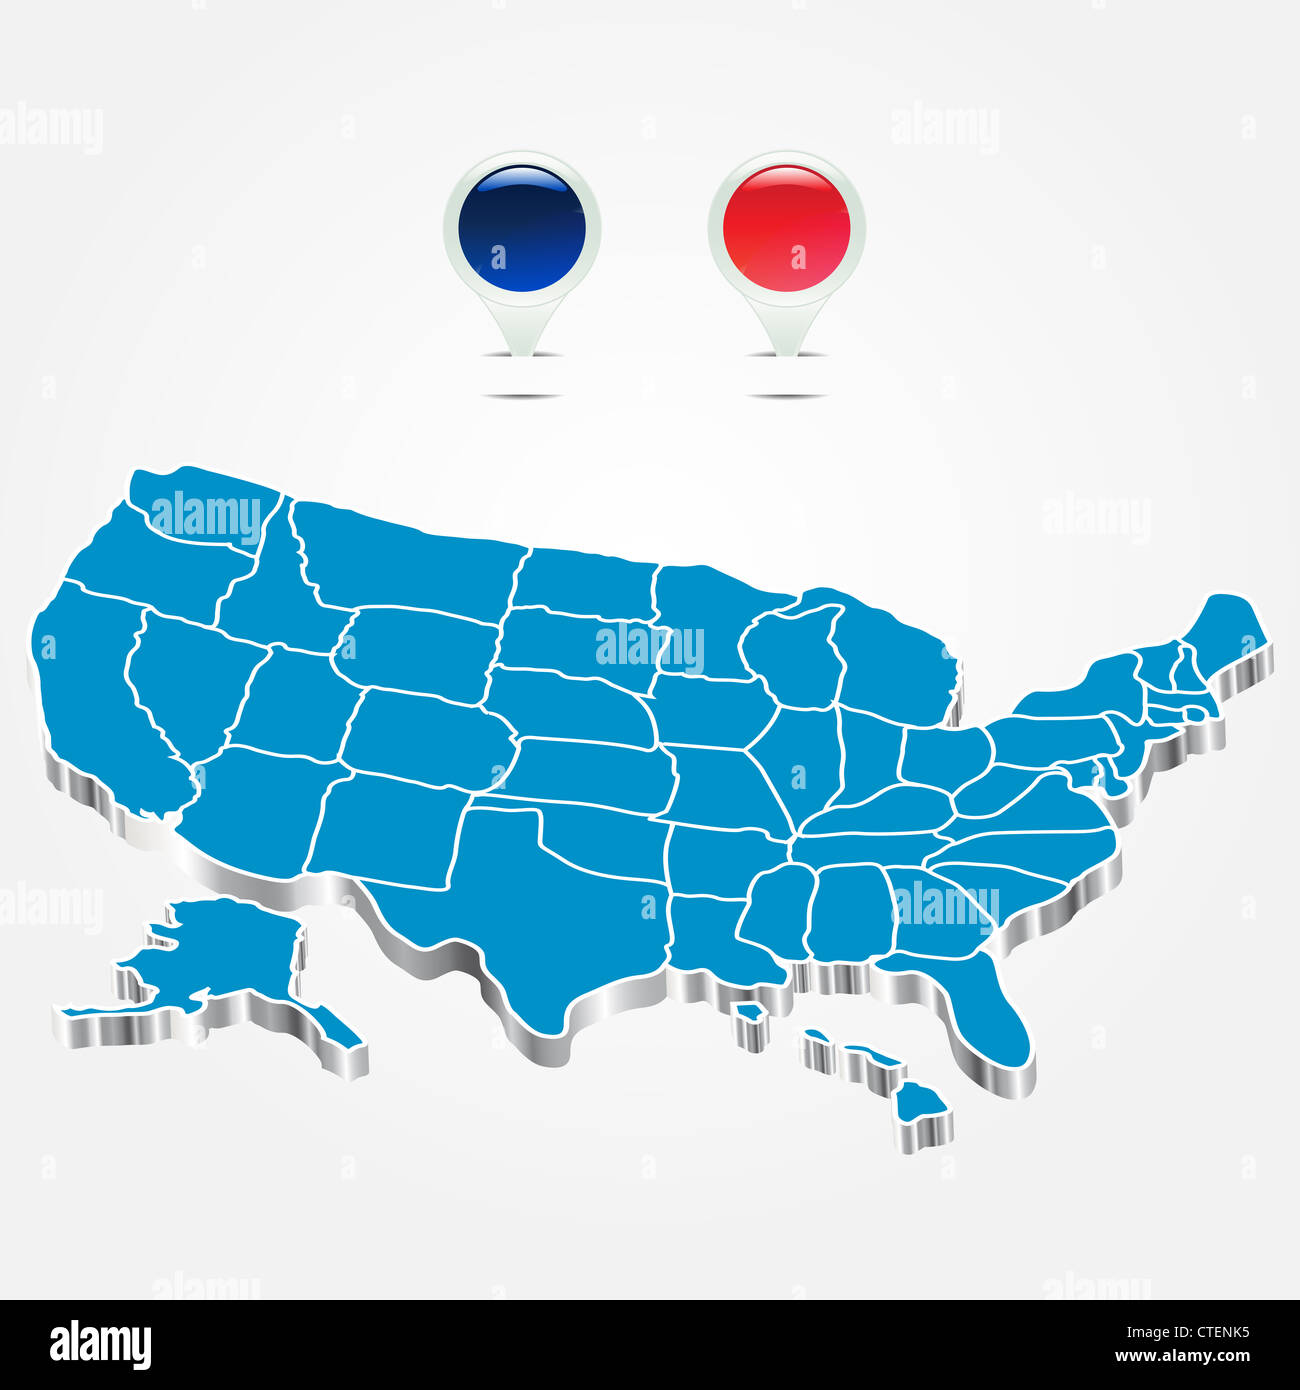 The electoral districts pined on 3d USA map Stock Photo